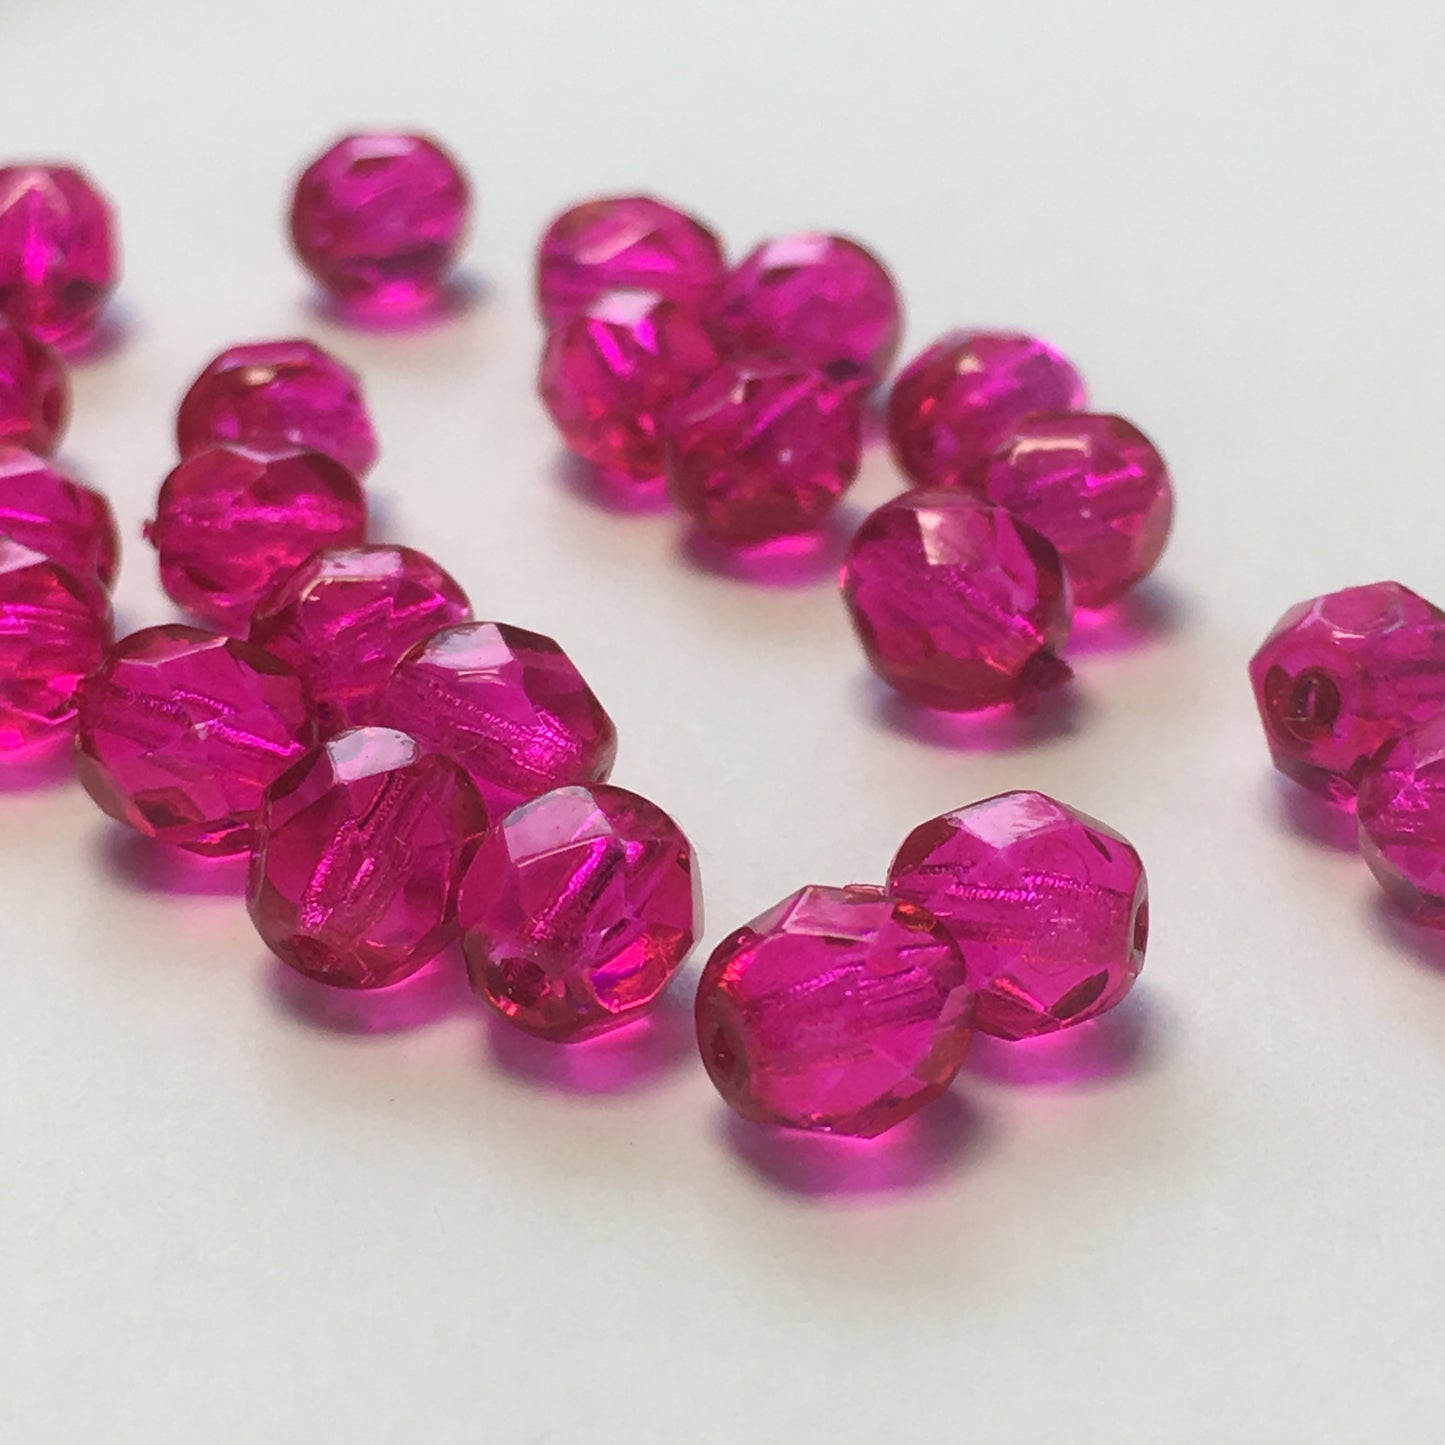 Hot Pink Coated Faceted Round Glass Beads, 6 mm - 24 Beads